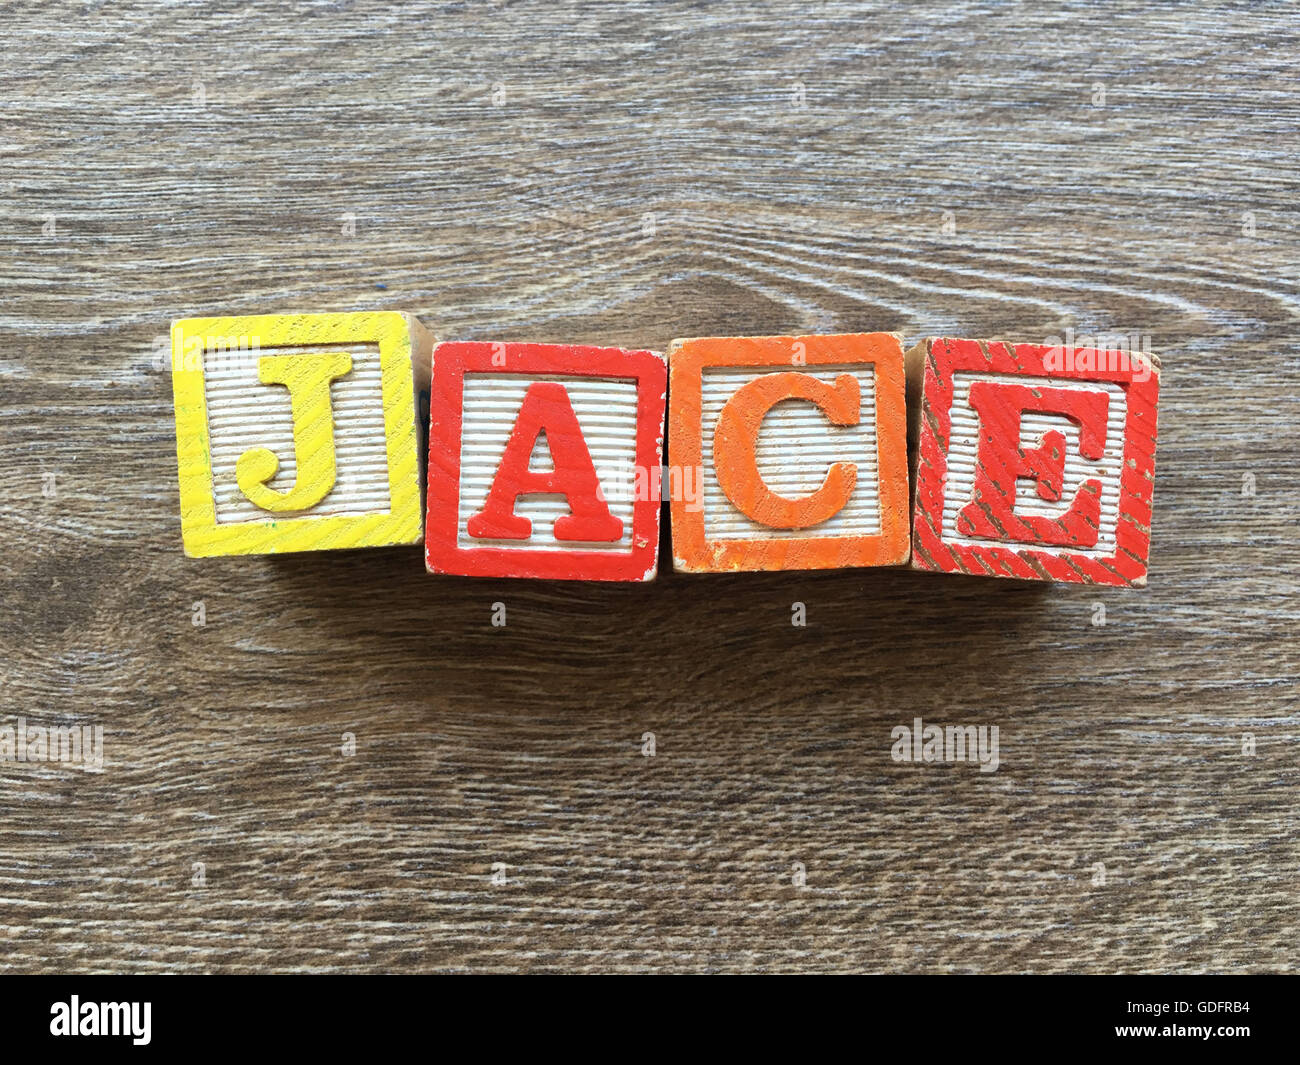 Jace name written with wood block letter toys Stock Photo